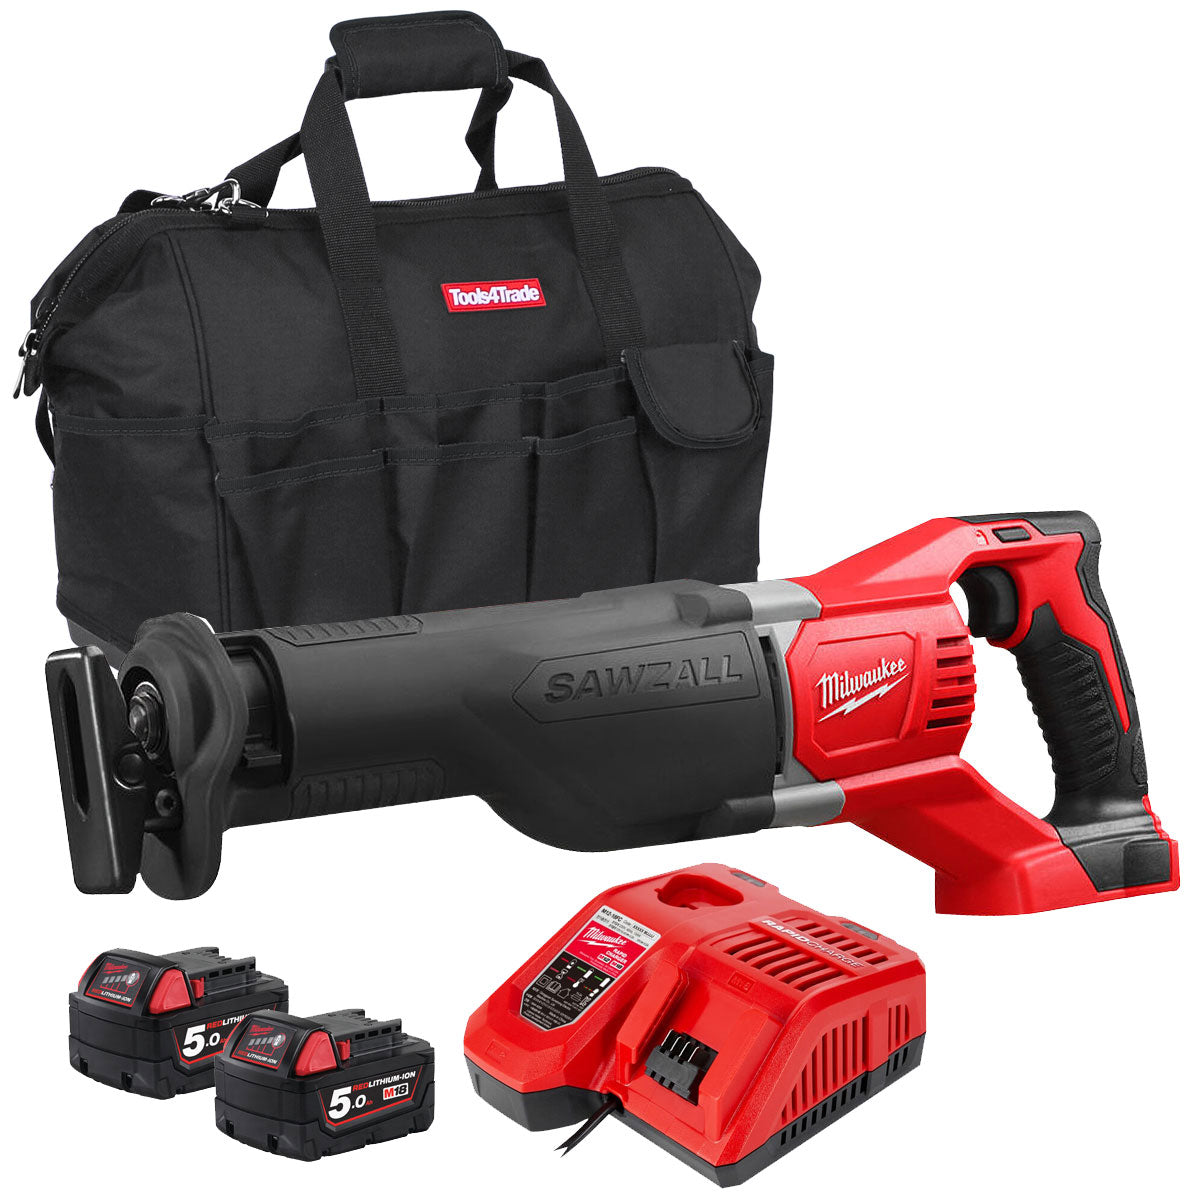 Milwaukee M18BSX-0 18V Sawzall Reciprocating Saw with 2 x 5.0Ah Batteries & Charger in Bag